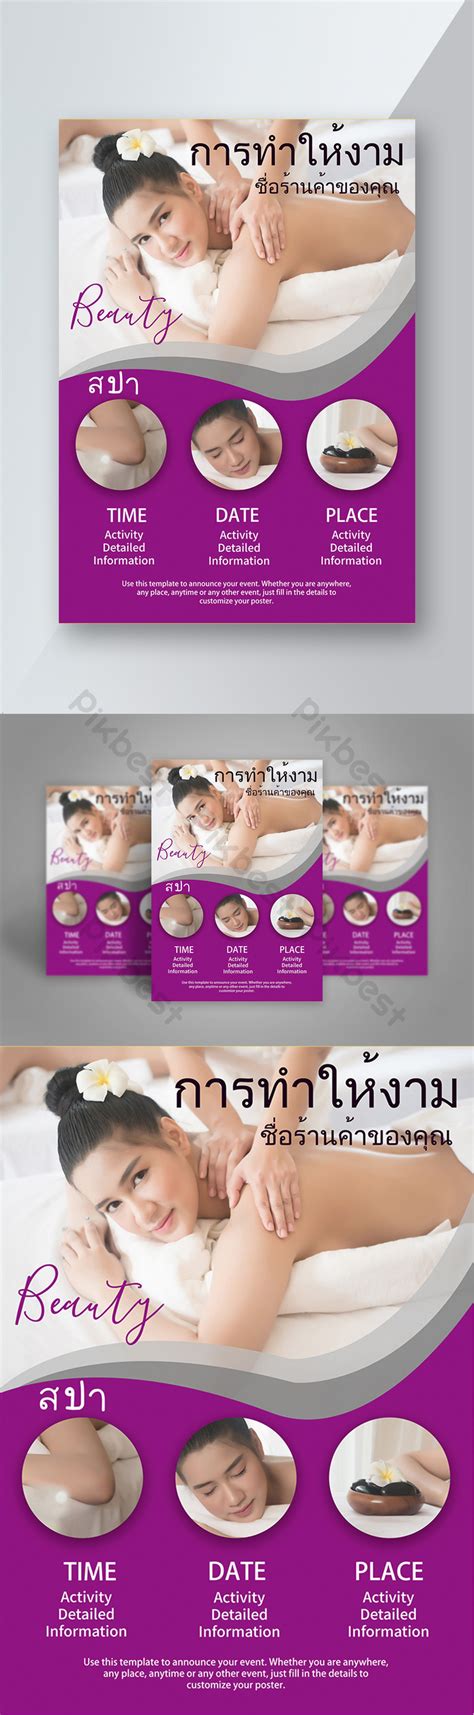 thai beauty happy massage person information introduction streamlined flyer psd free download